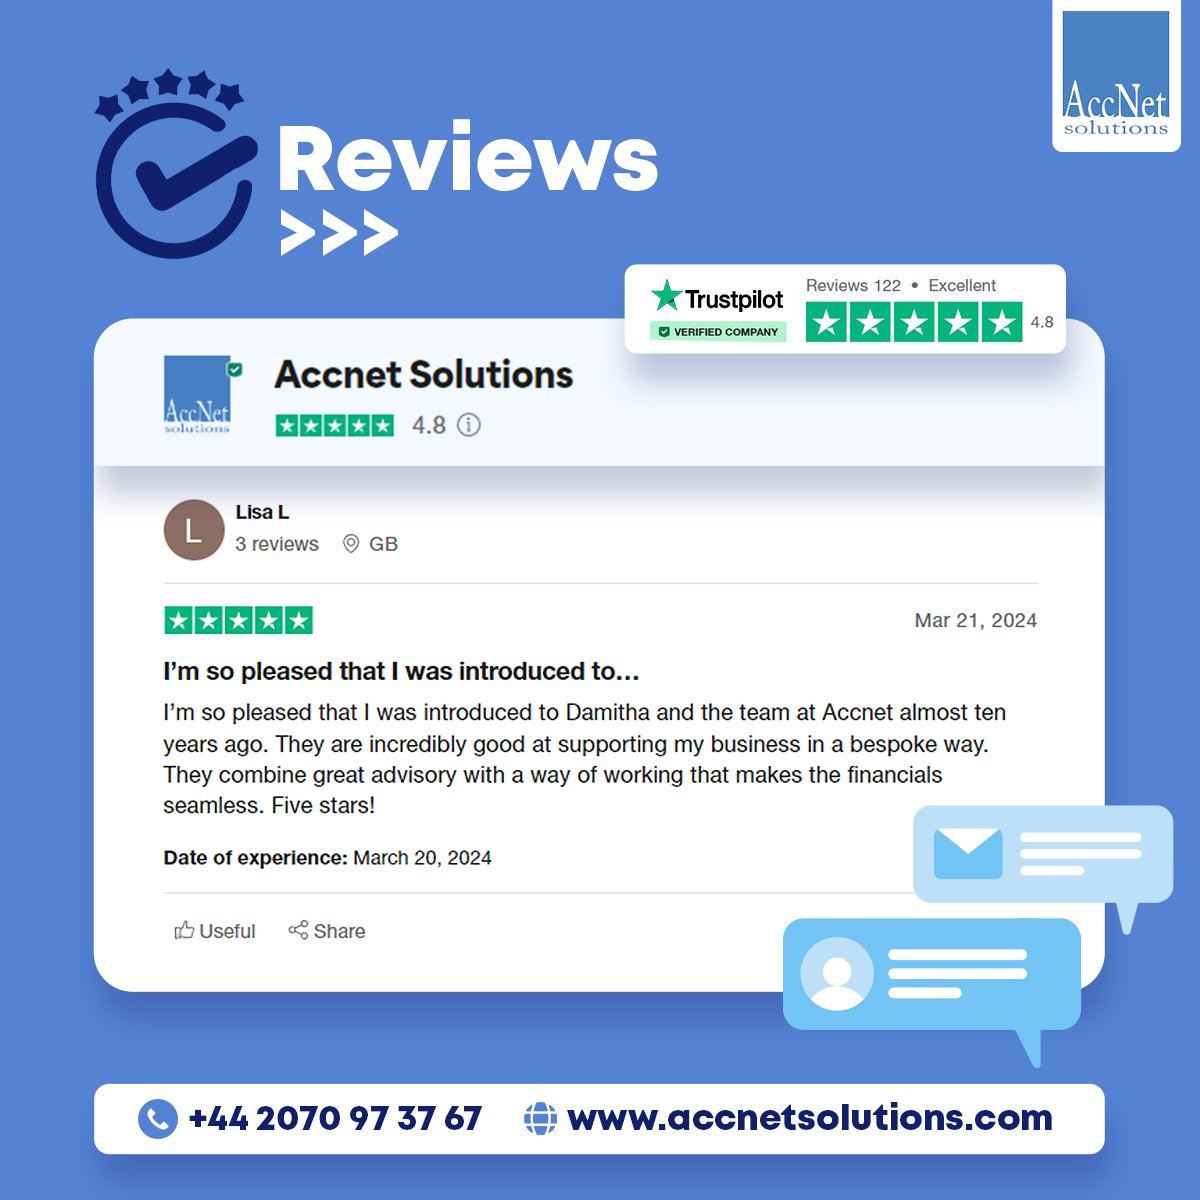 Join the satisfied clients who have experienced the excellence of AccNet Solutions for nearly a decade. 

Give us a try at AccNet on +44 2070 97 37 67

#ukpayroll #payingyourself #accounting #ukincometax #taxexpert #taxconsultant